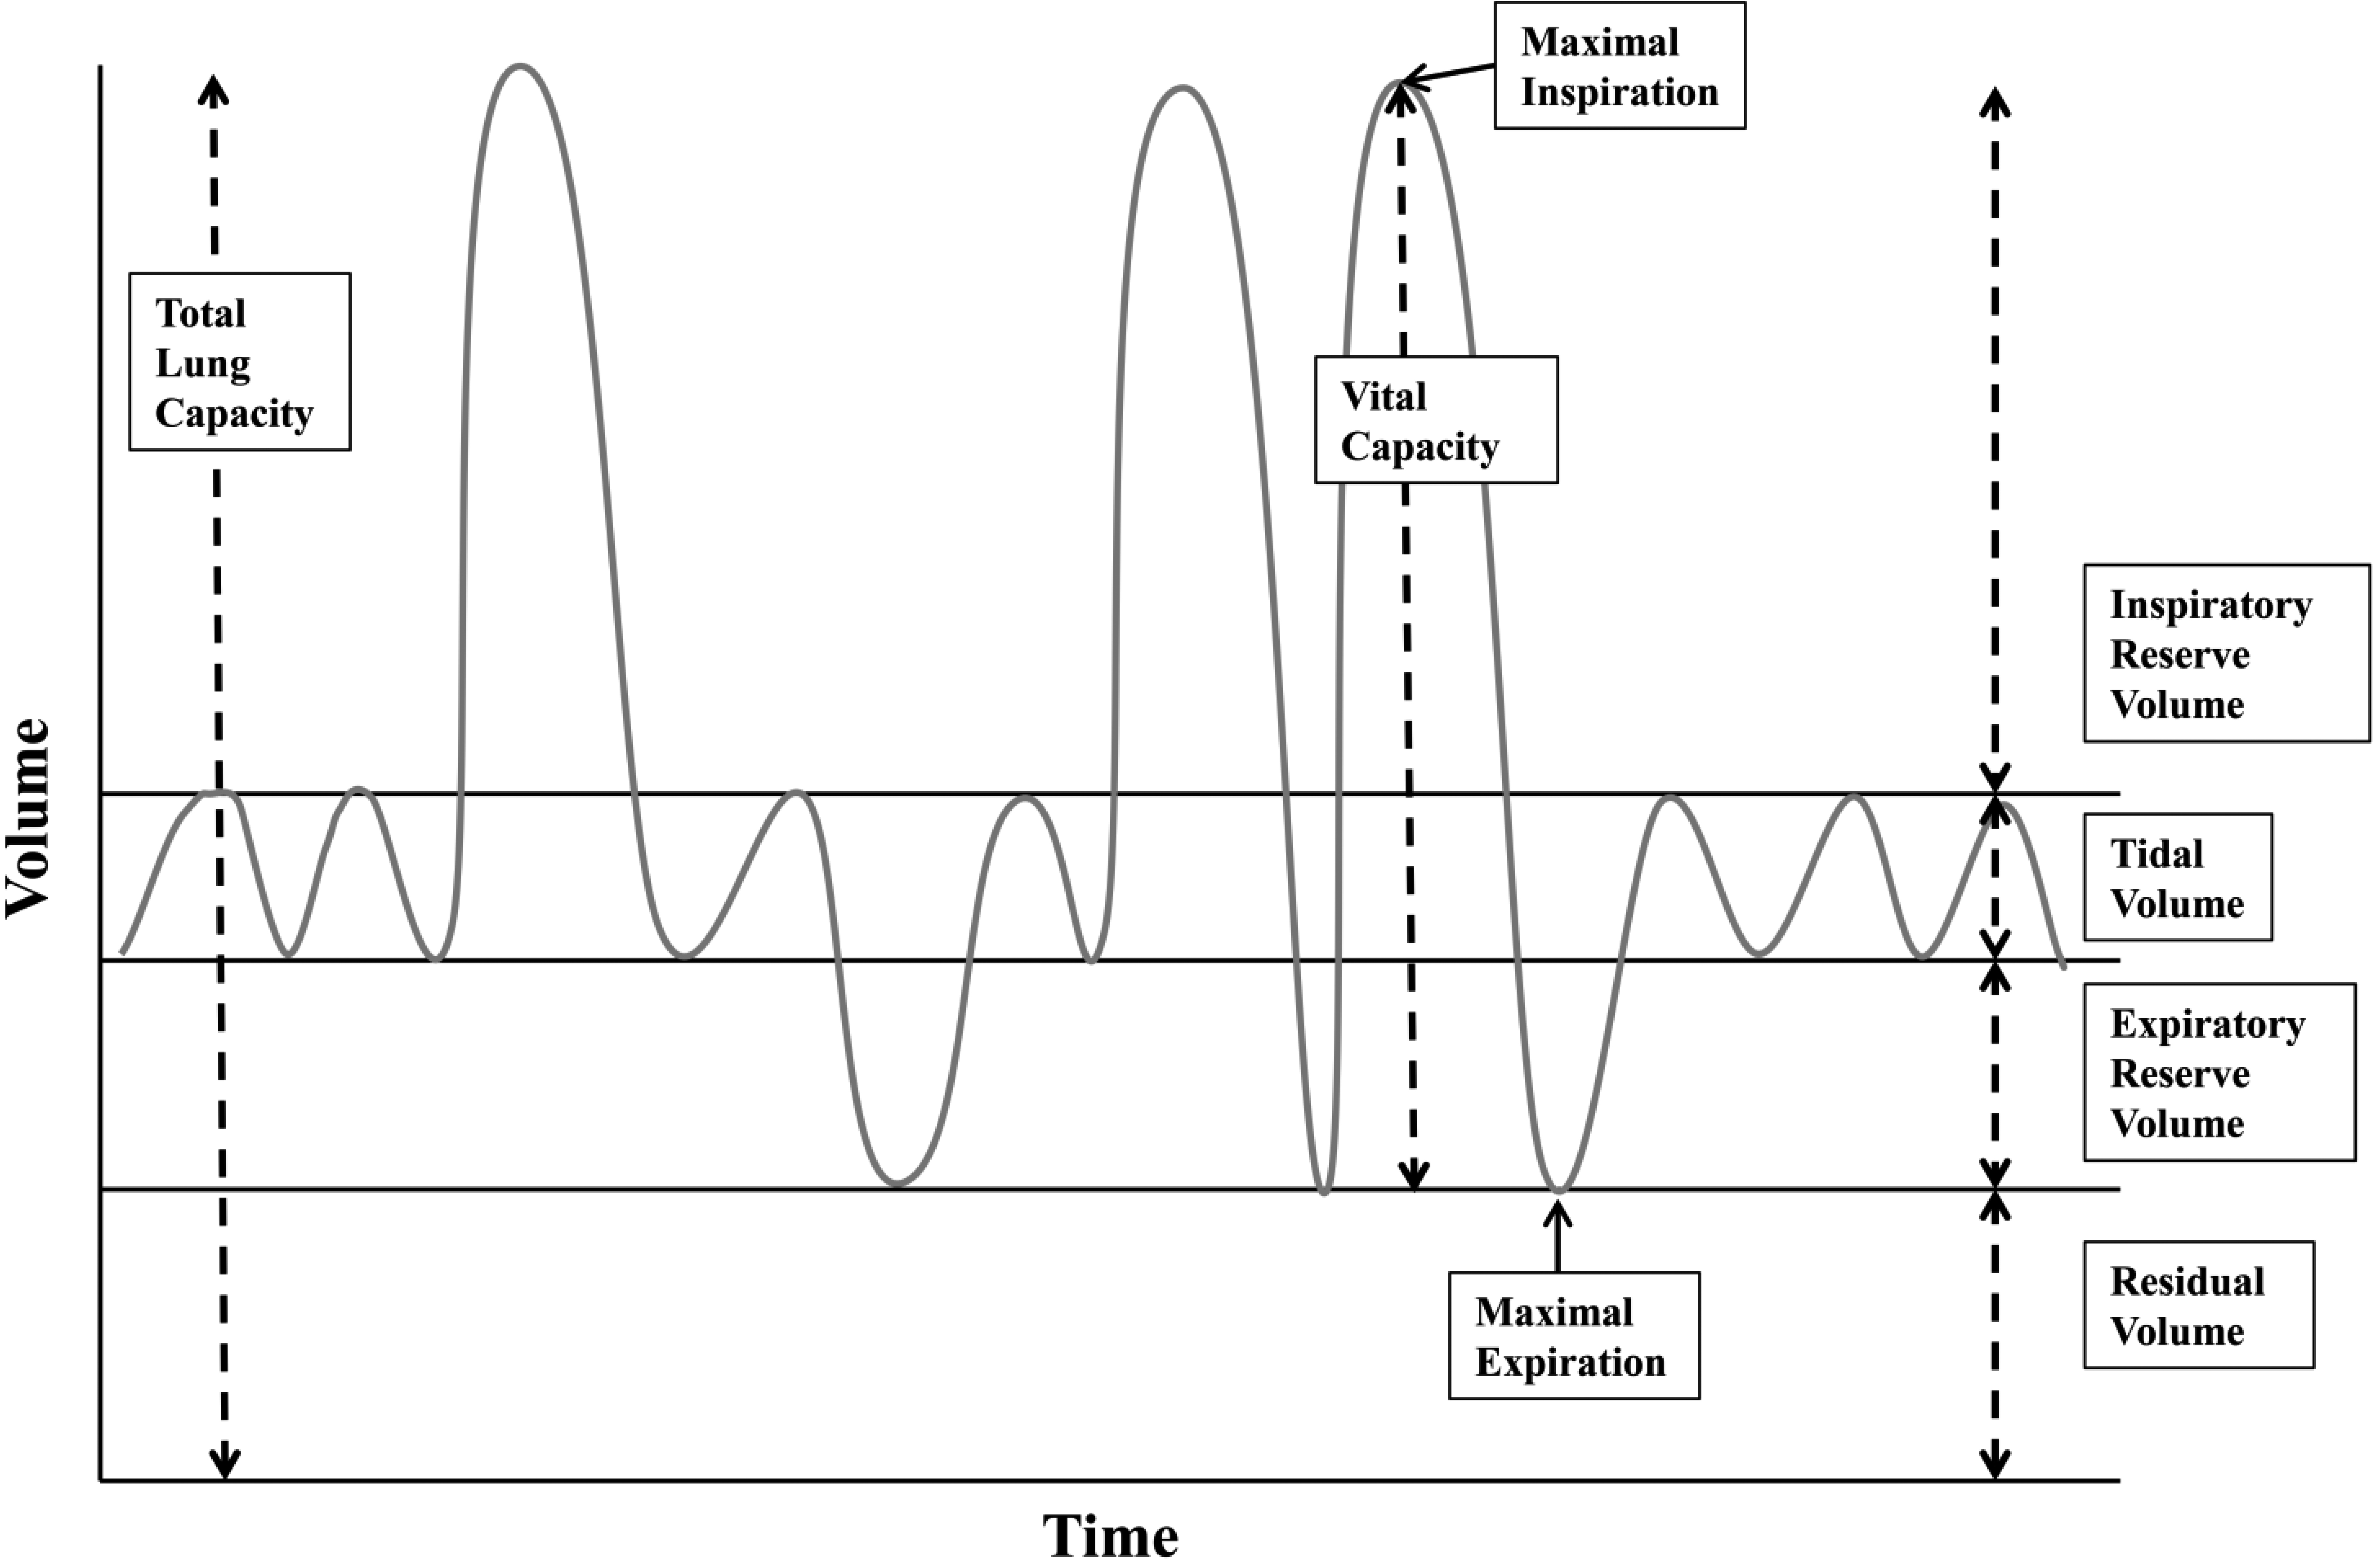 Respiratory parameters in pulmonary function testing. Total lung capacity is the amount of air in the lungs after maximal inspiration and is about 4 L to 6 L in adults with volumes varying depending on age, sex, and body composition [93, 94, 95]. Tidal volume is the amount of air inhaled and exhaled during quiet breathing. In healthy adults, tidal volume is between 400–500 ml, approximately 10% of the total lung volume [96]. Vital capacity is the maximal amount of air that can be exhaled after maximal inhalation [97]. Vital capacity is composed of the tidal volume, inspiratory reserve volume, and expiratory reserve volume. Two common measures for vital capacity are the forced vital capacity which is the maximal amount of air that can be exhaled at maximum speed and effort following maximal inspiration, and slow vital capacity which is the maximal amount of air that can be slowly exhaled following maximal inspiration. Forced expiratory volume at 1 second is the maximal amount of air that can be exhaled in 1 second following maximal inspiration [98]. Residual volume is the amount of air remaining in the lungs after maximal expiration.